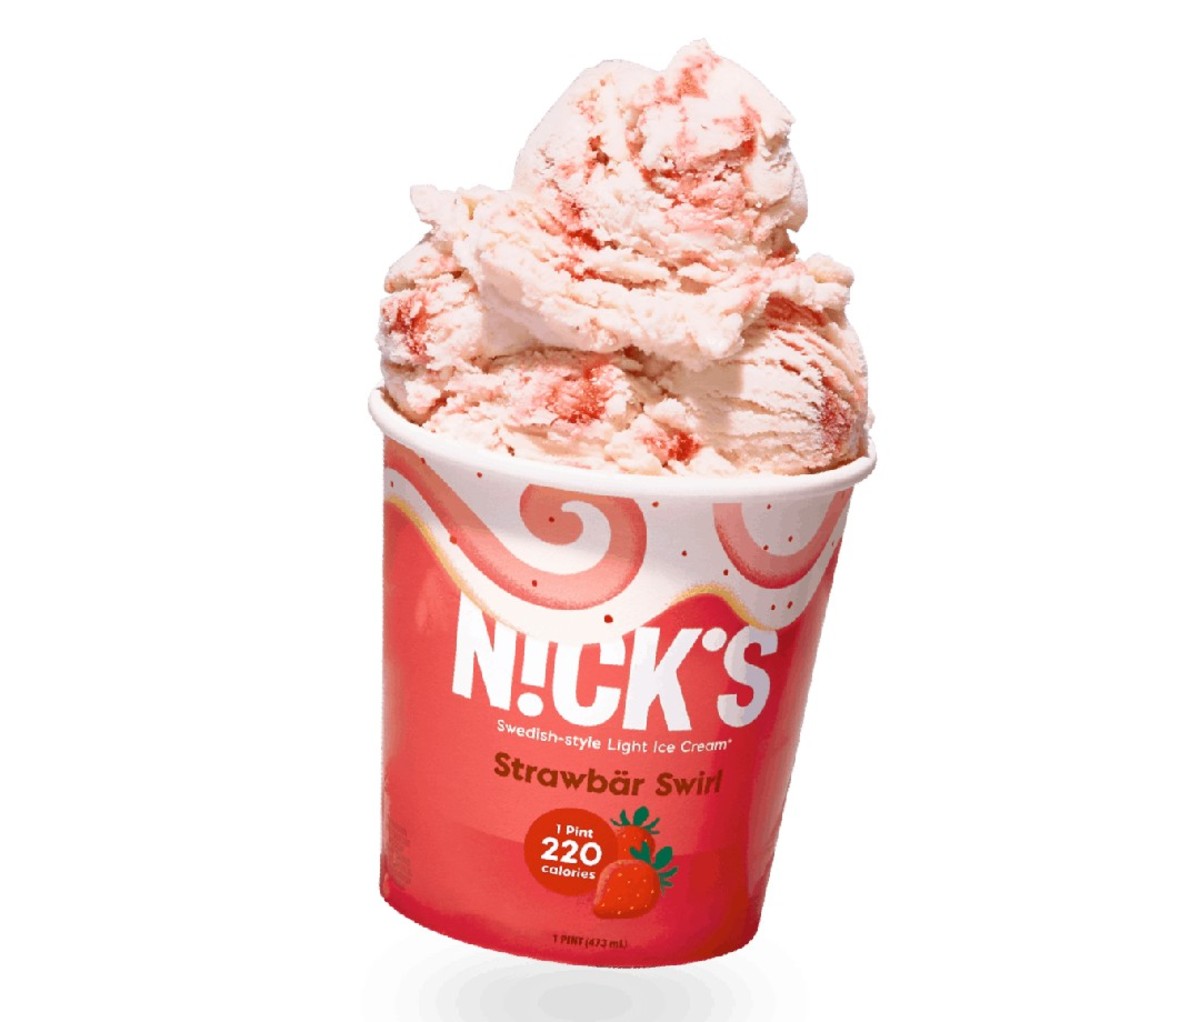 Nick’s Swedish Ice Cream’s are both delicious and low-calorie as their pints range from 220-360 calories in a ton of different flavors. Their ice creams have no added sugars, synthetic ingredients, or artificial sweeteners, either.